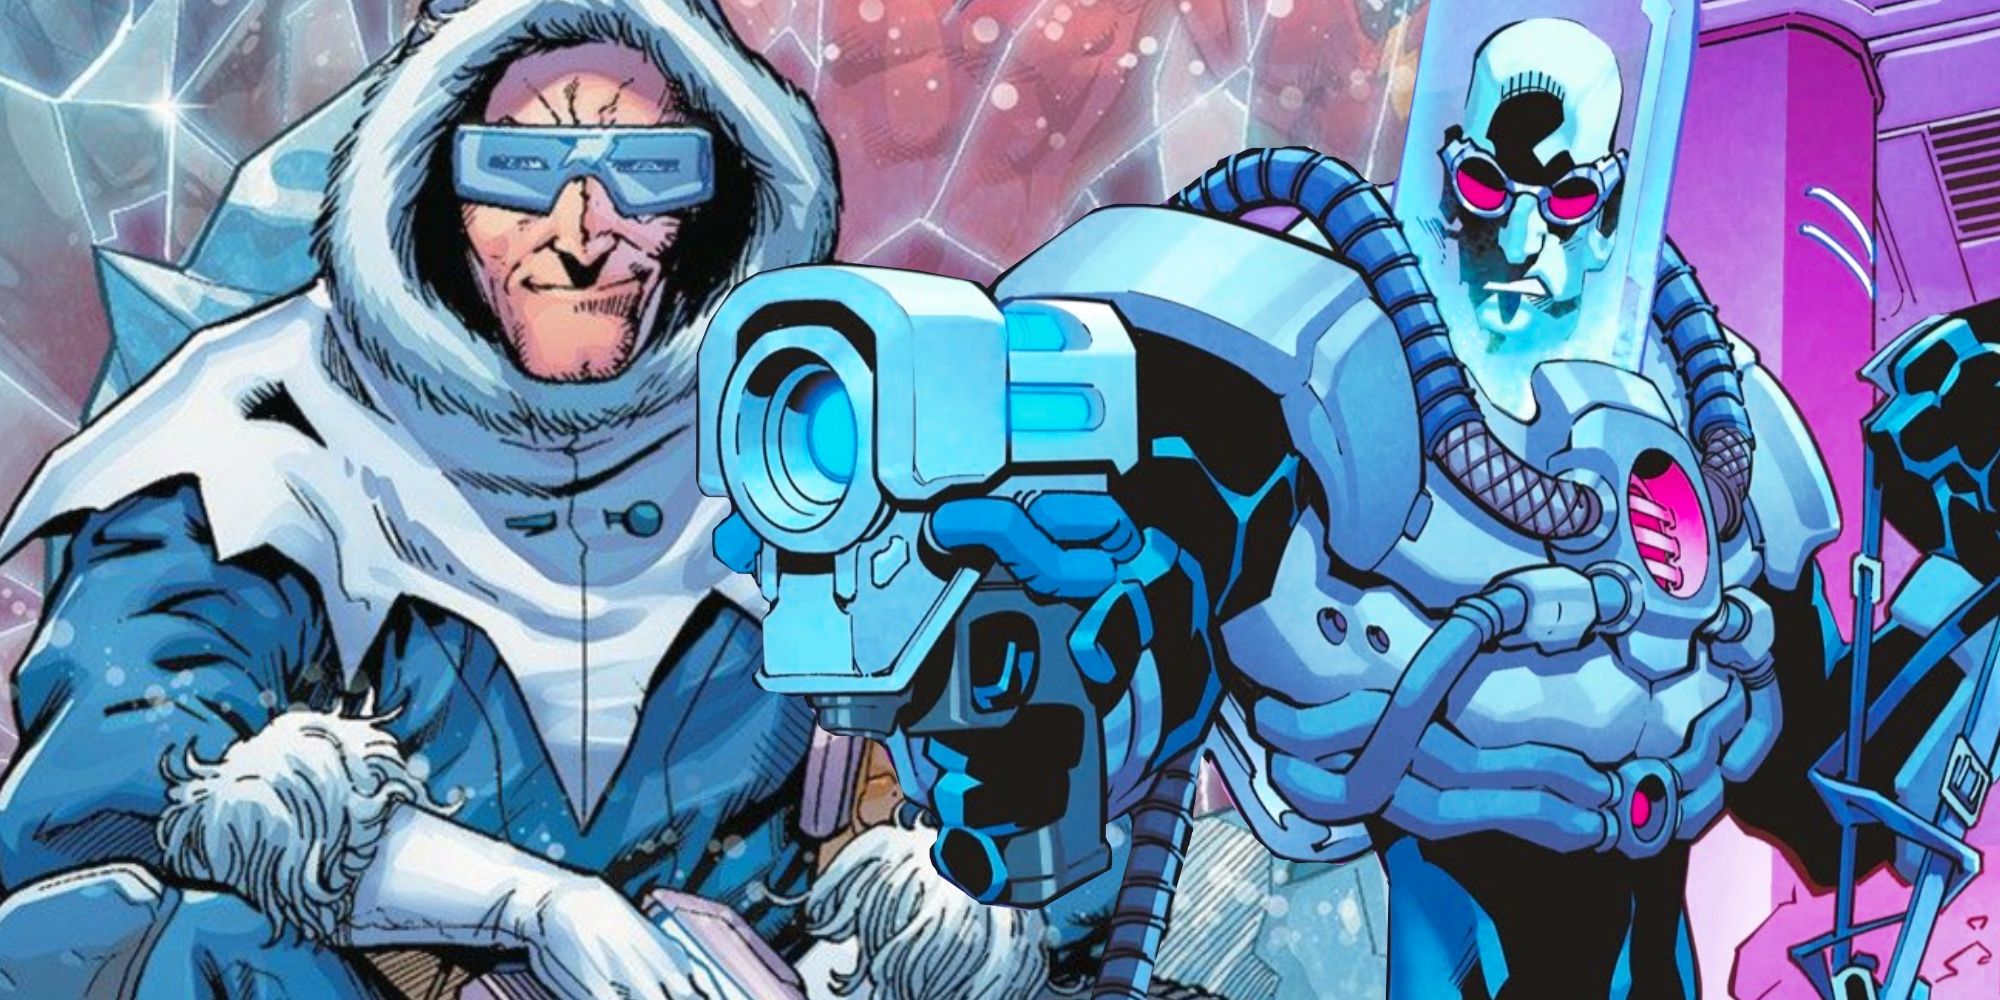 Captain Cold and Mister Freeze